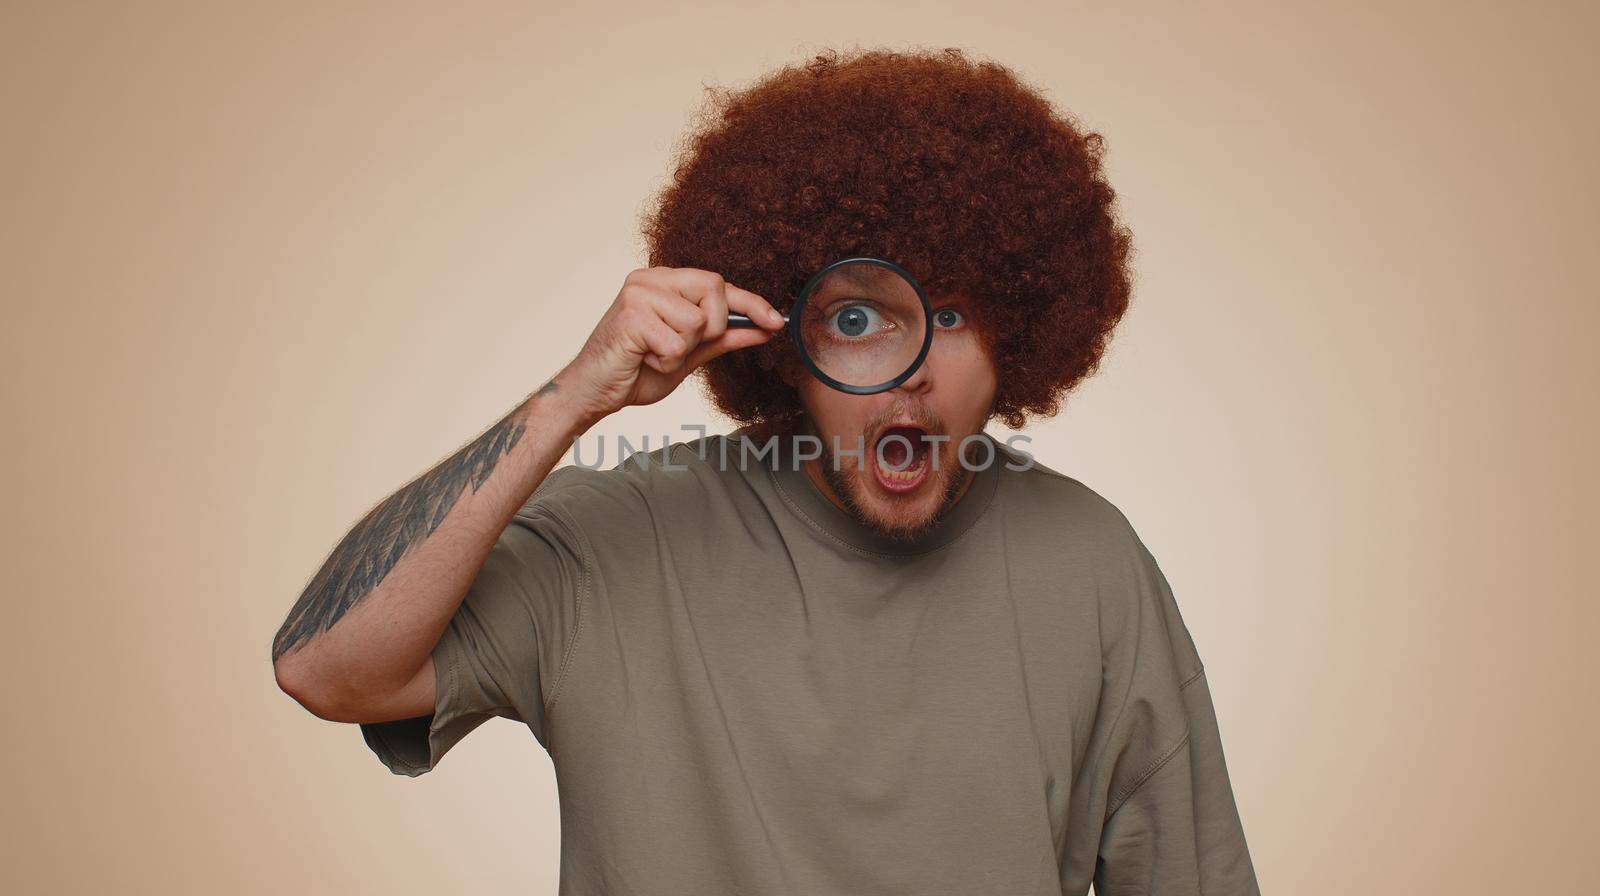 Investigator researcher scientist man holding magnifying glass near face, looking into camera with big zoomed funny eyes, searching, analysing. Young adult guy isolated on beige studio background